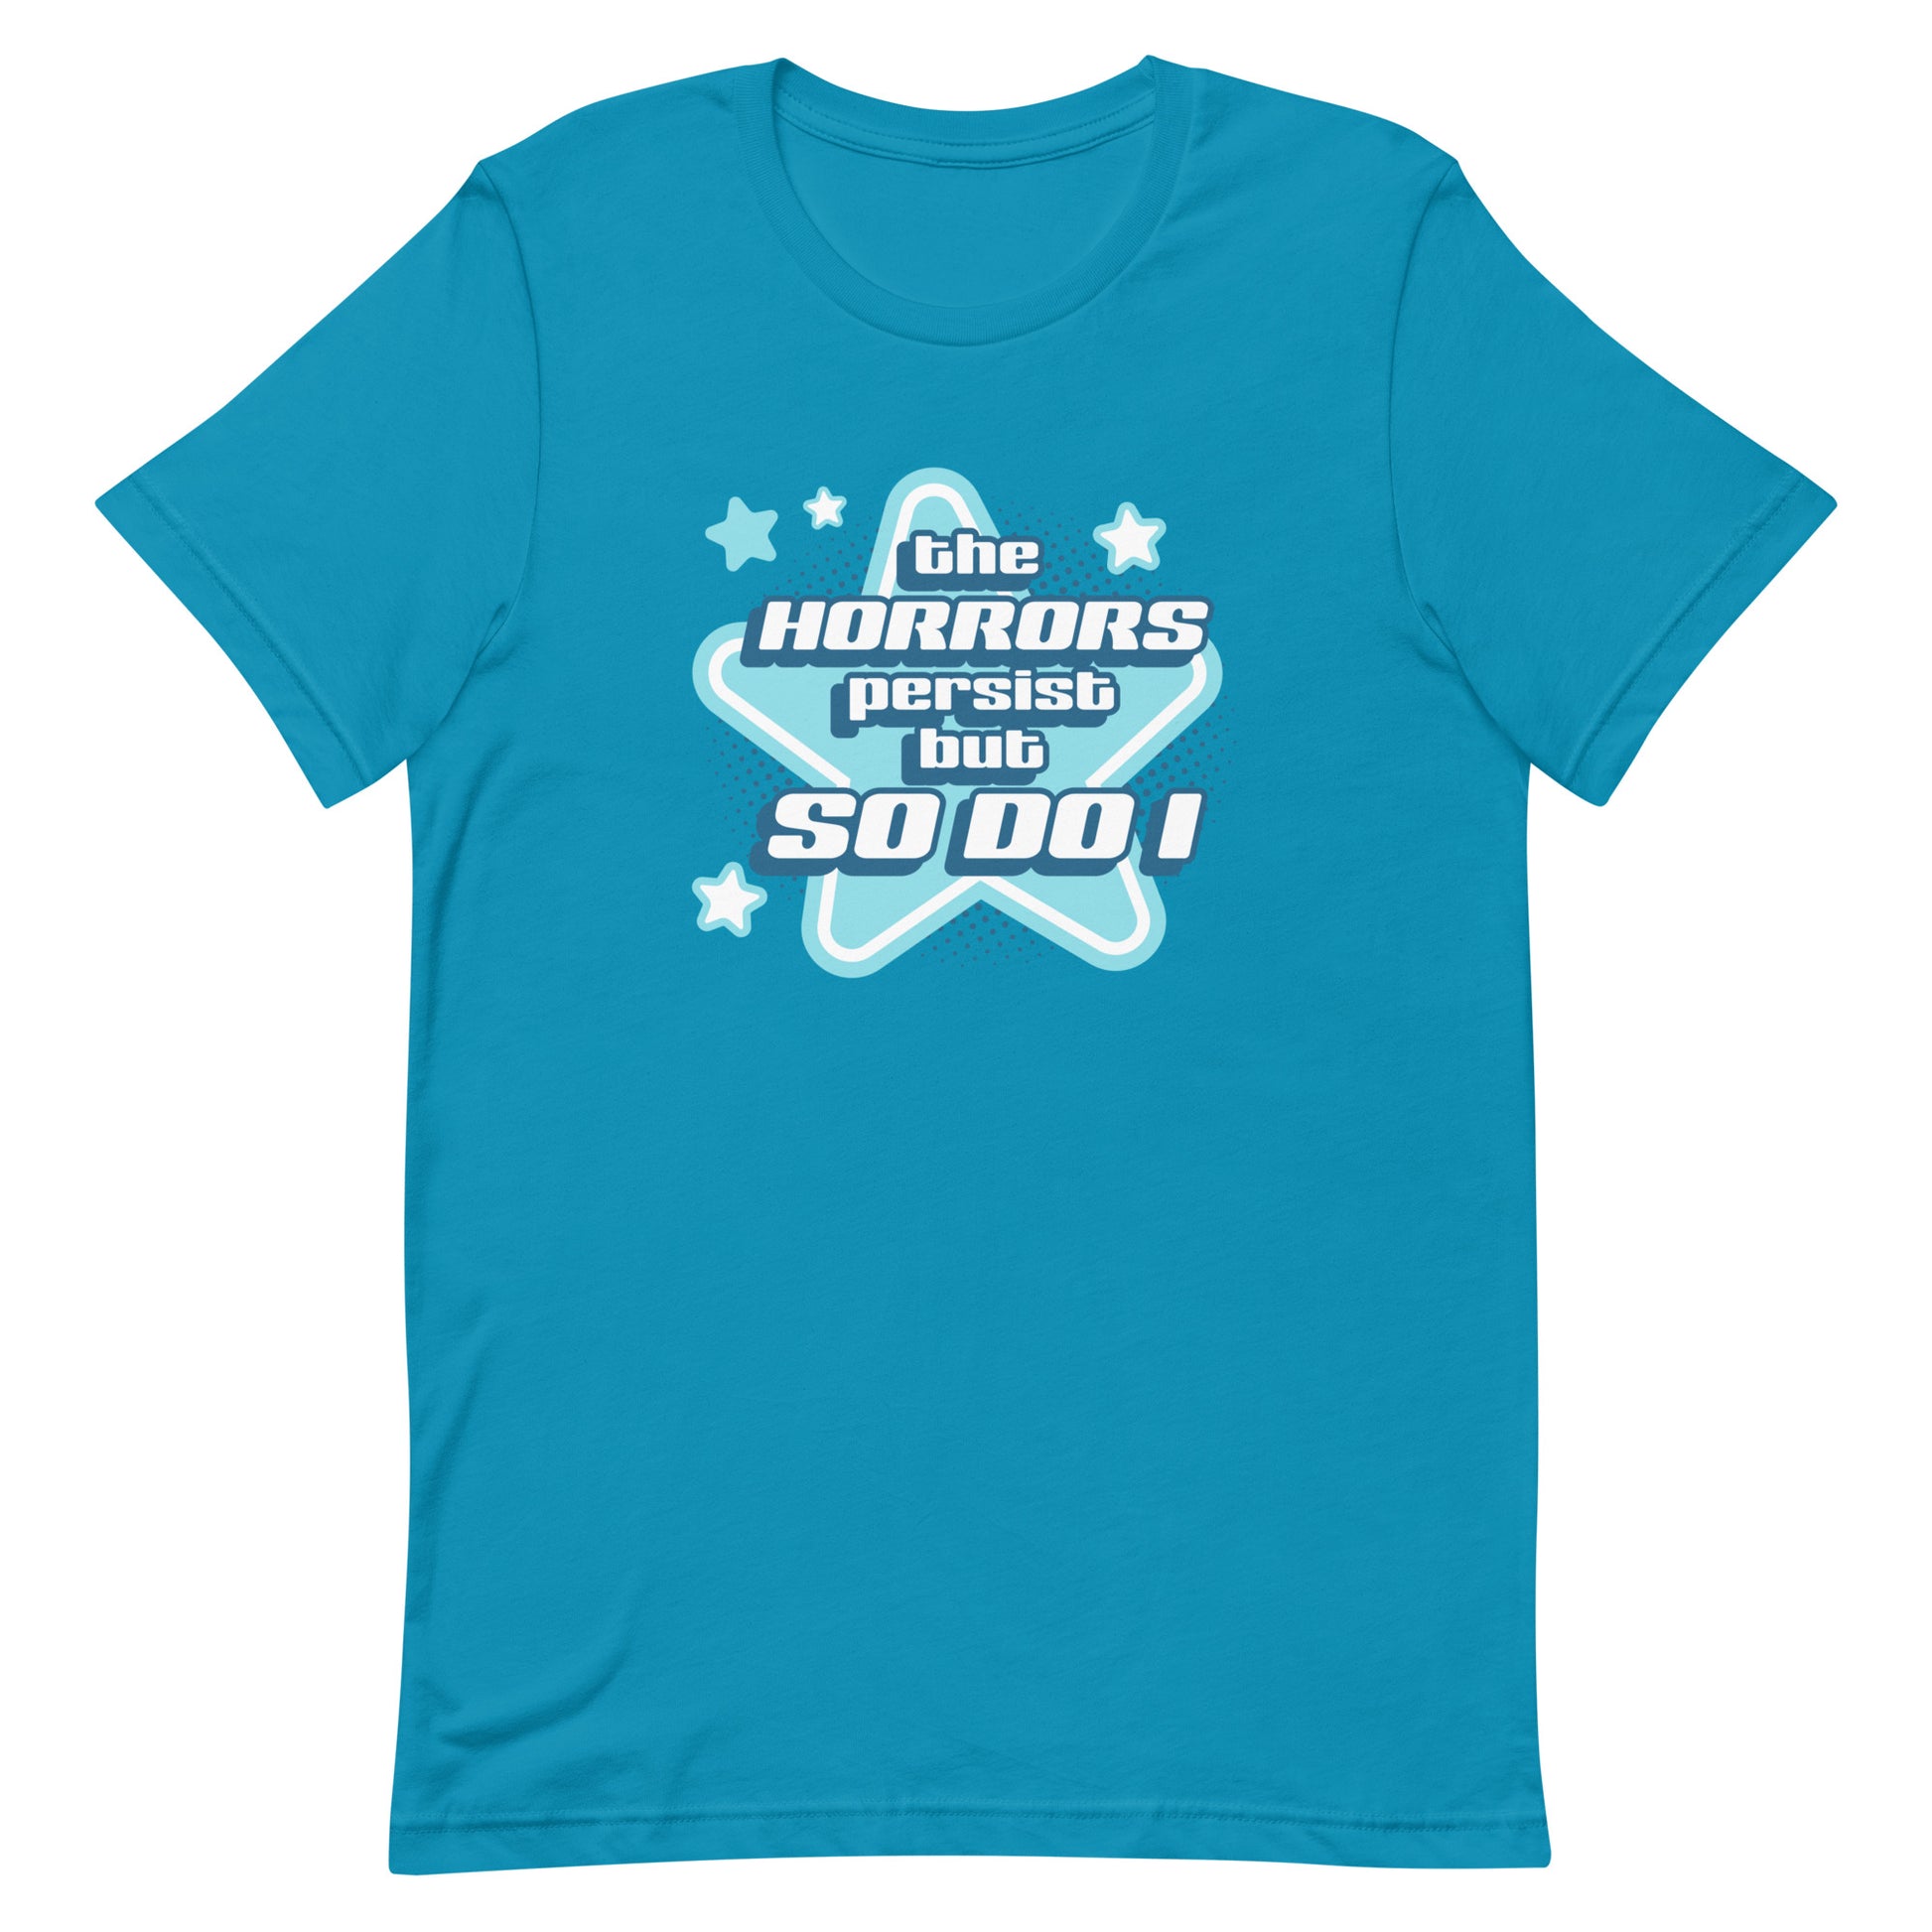 A blue crewneck t-shirt featuring blue and white stars over a halftone pattern with chunky text that reads "the horrors persist but so do i".